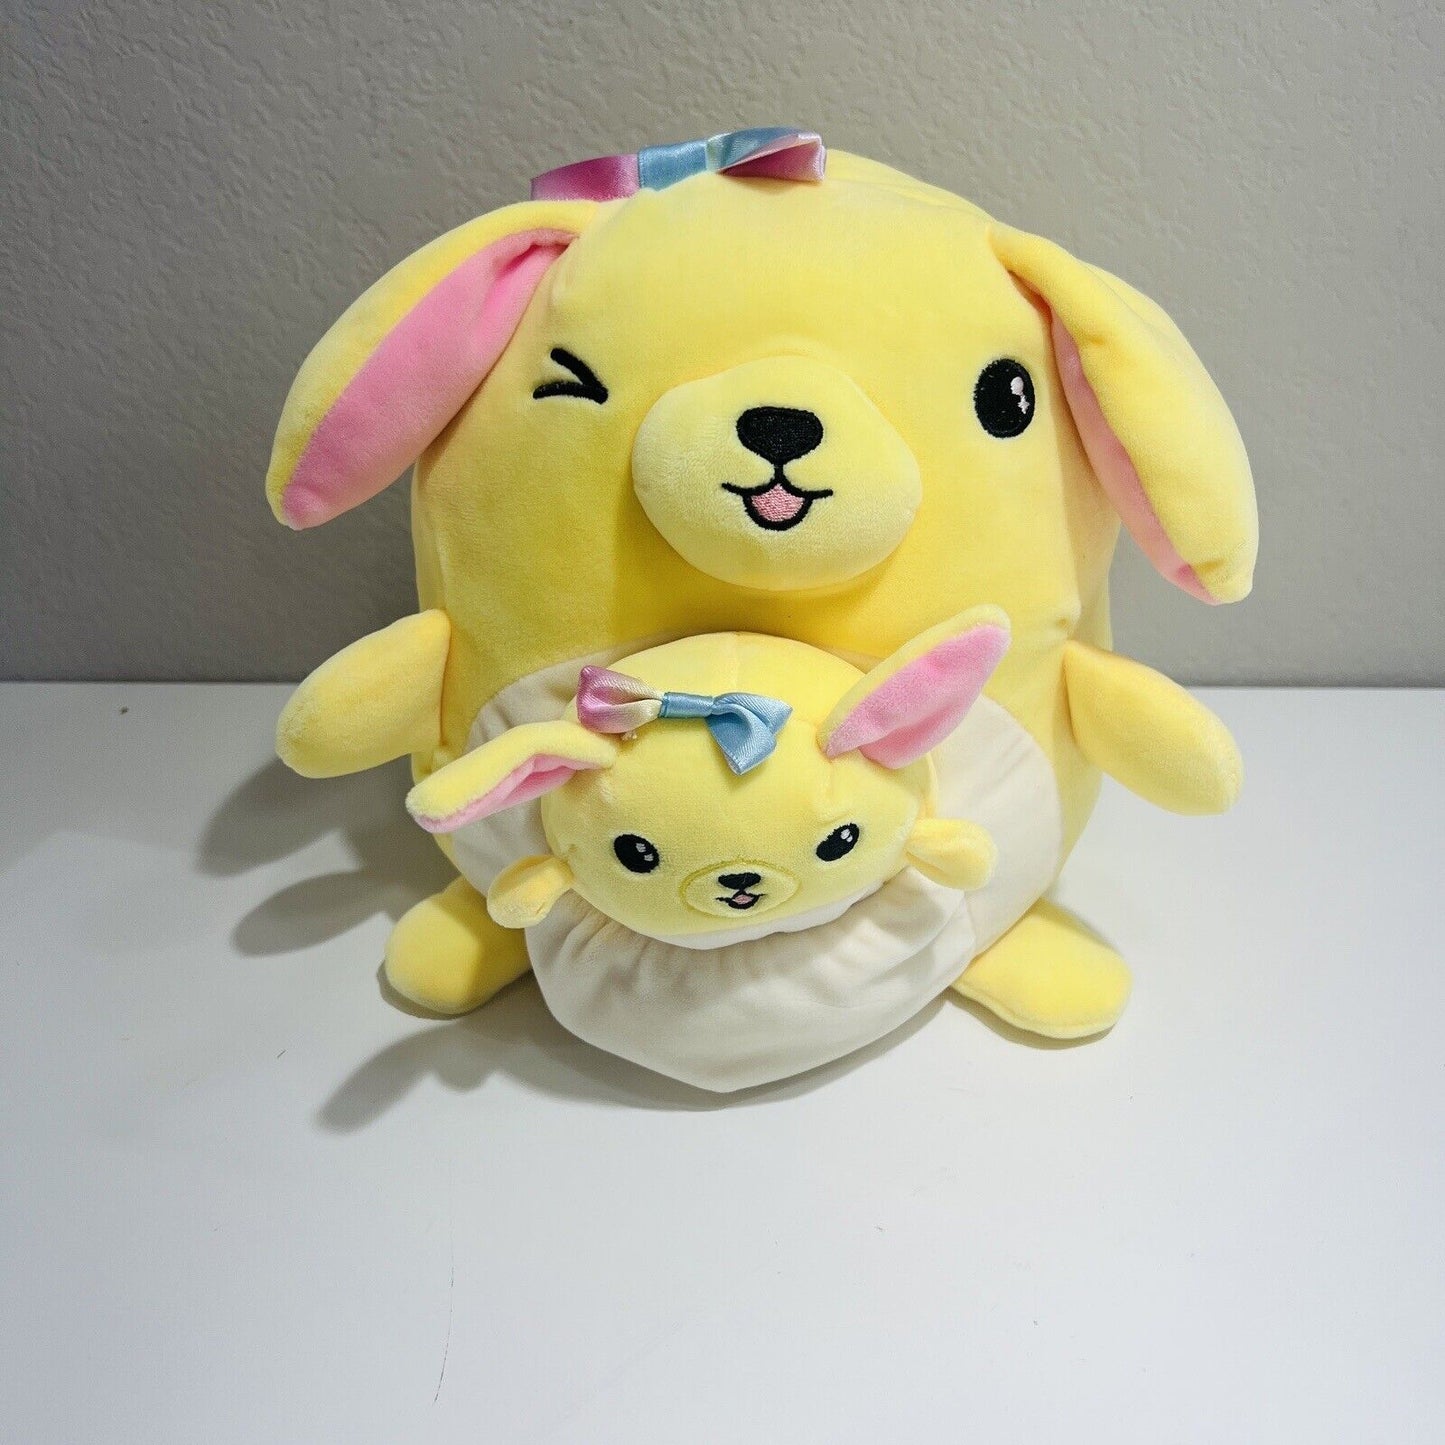 Squishmallow Justice Merry Golden Retriever Dog Baby 2 Plushs 8.5" & 4.5" Kelly